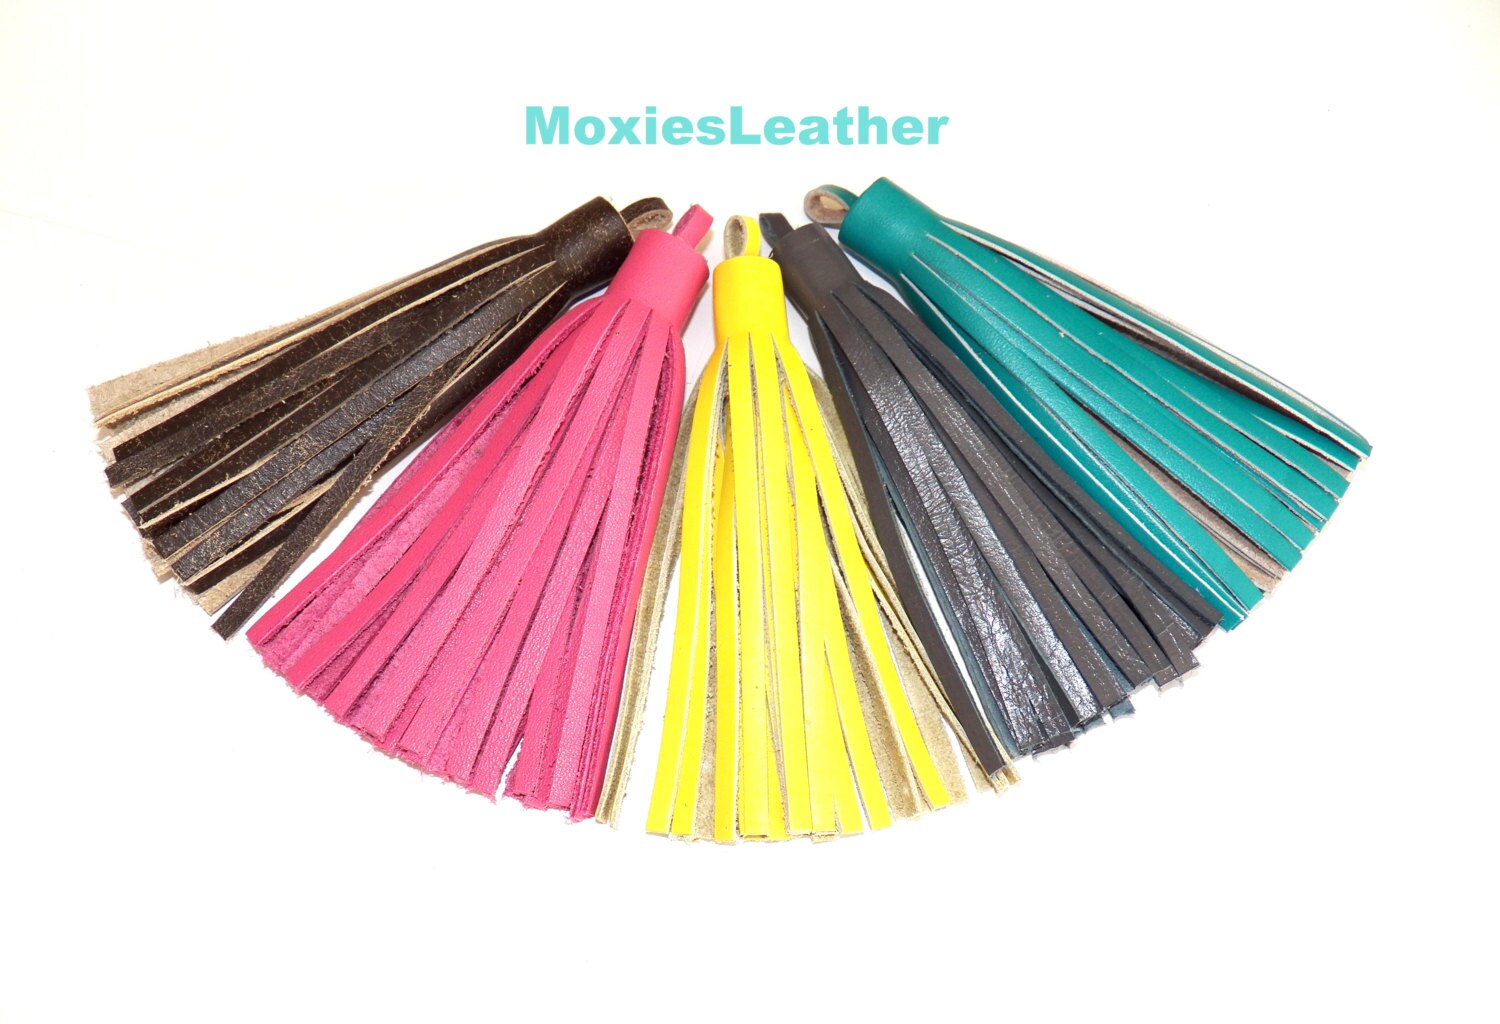 Extra Large Thick Candy Pink Thread Tassels - 4.4 inches - 113mm